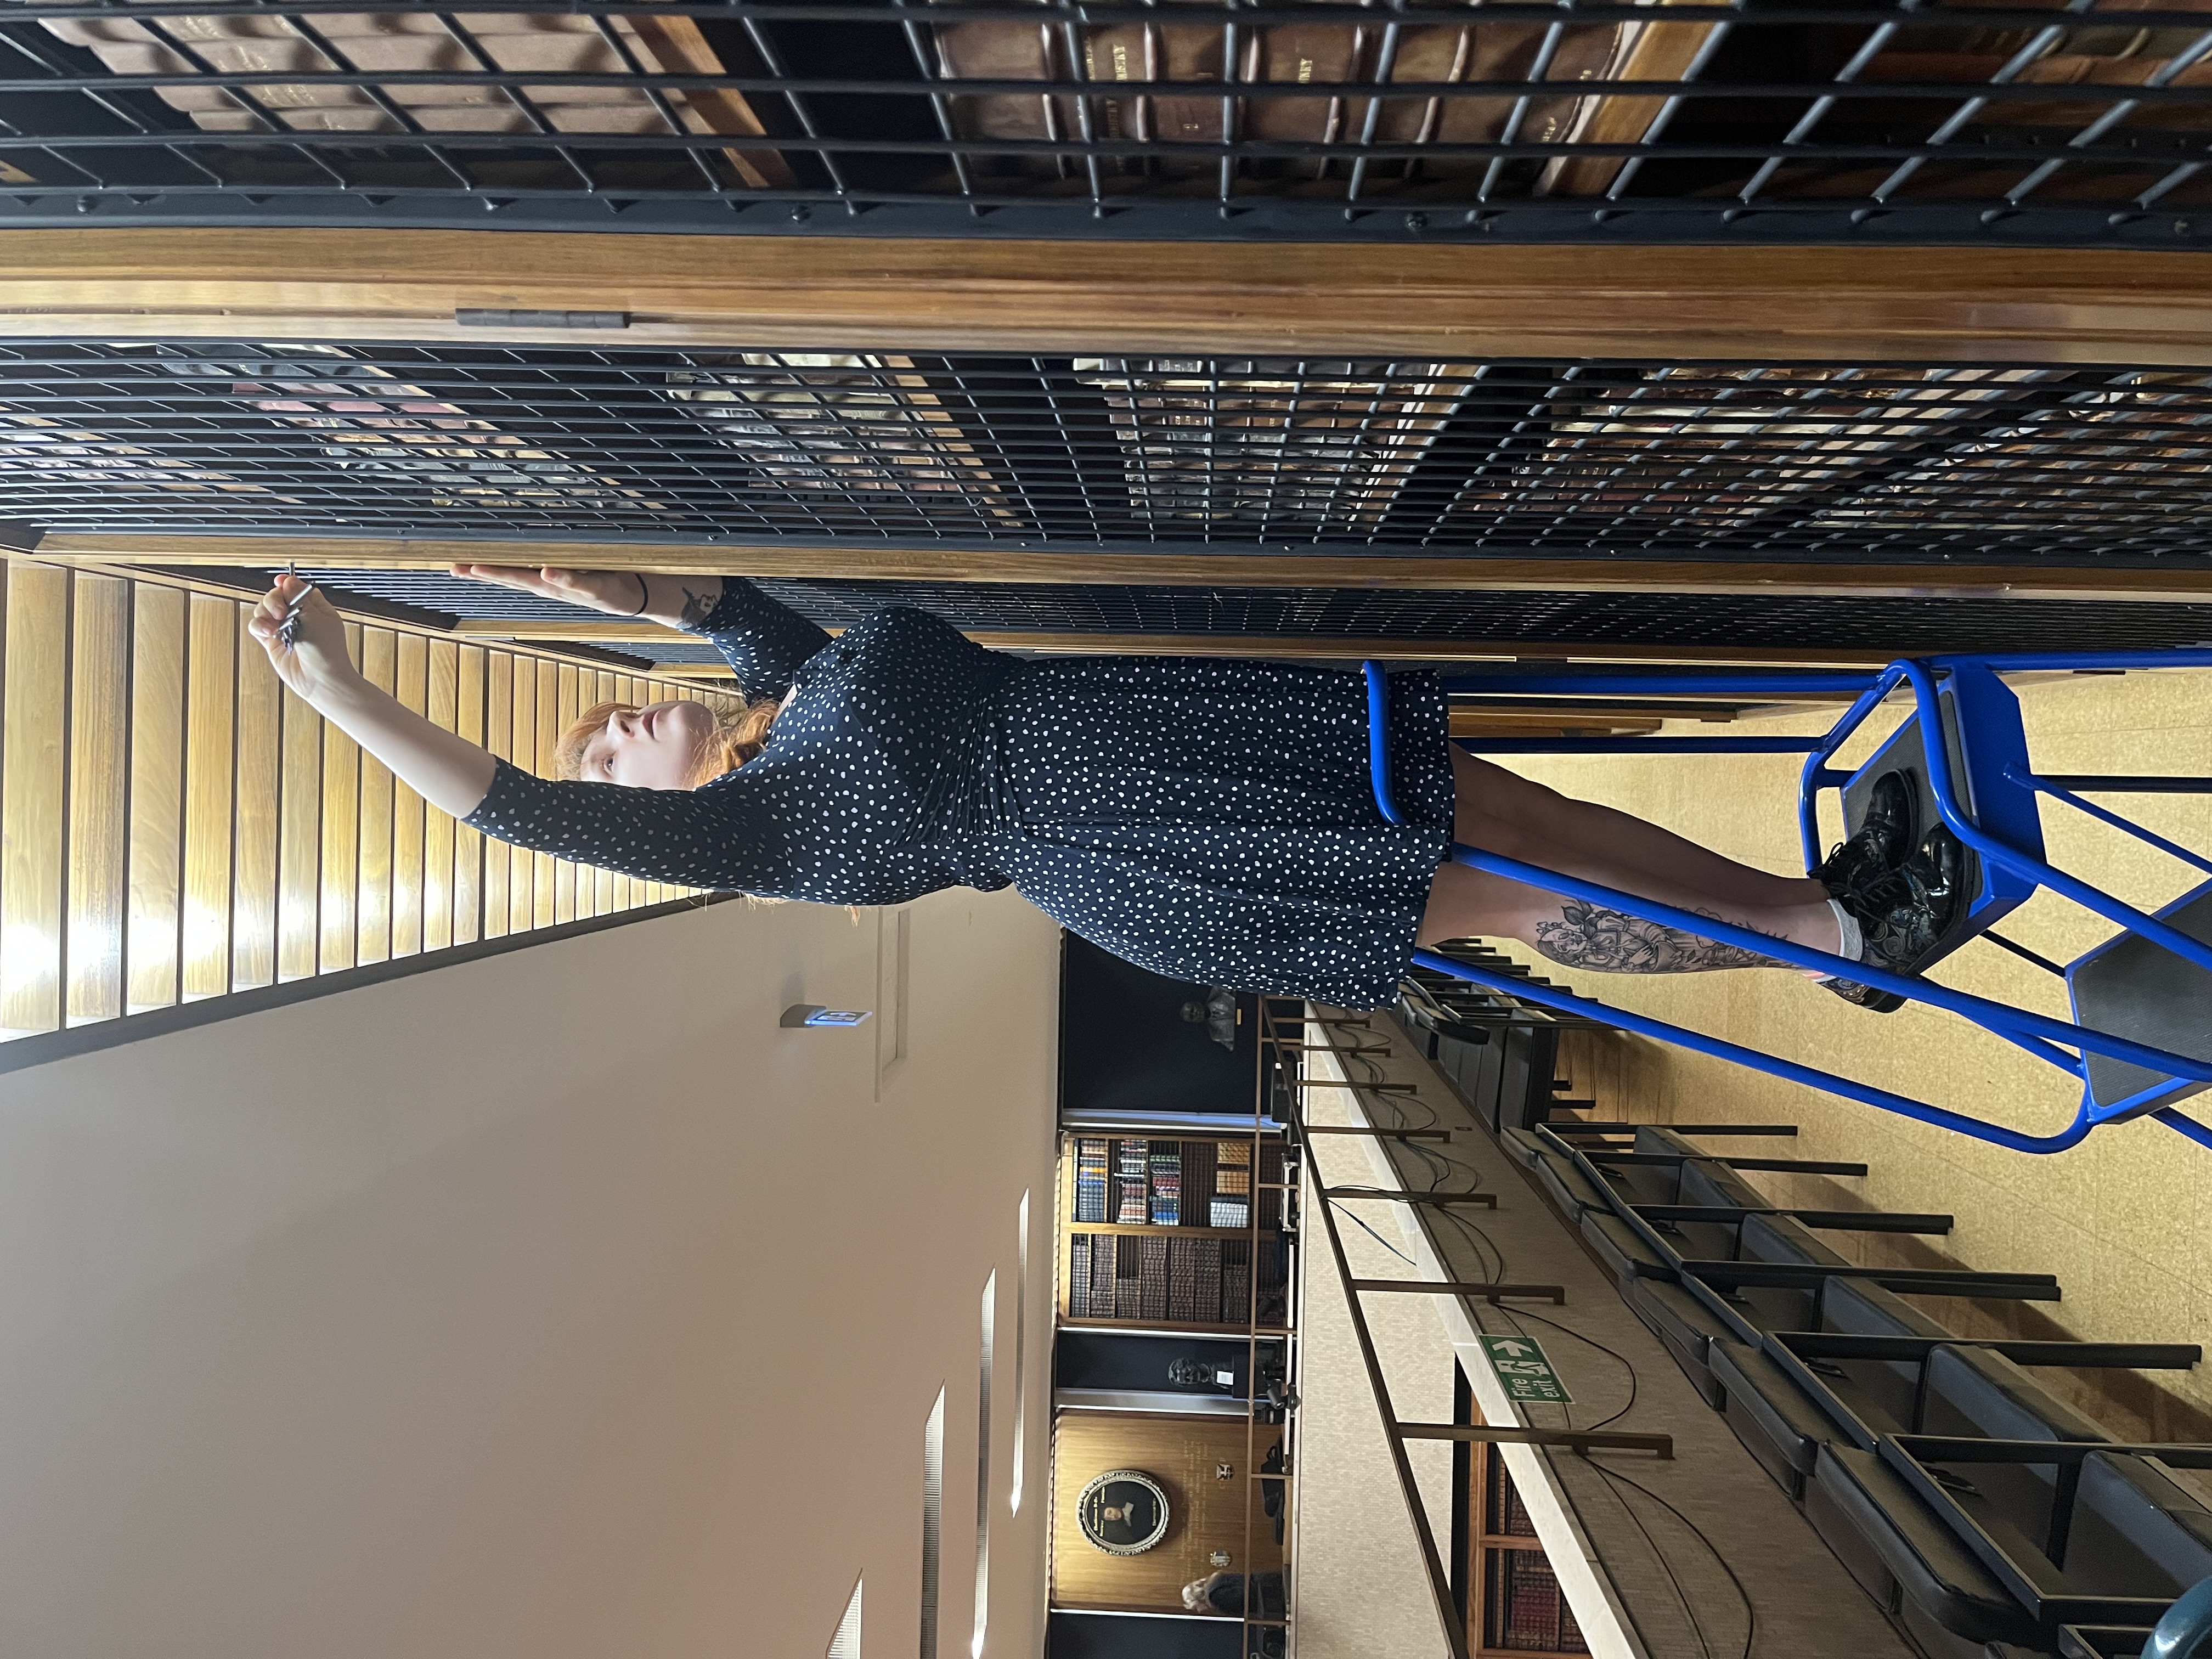 Image shows Kate, a white woman in her twenties, atop a blue library ladder. She is using a key to open a bookcase. She is on the first floor of the Royal College of Physicians Dorchester library. In the background, you can see more bookcases lining the walls of the room, and the portraits and busts of notable Royal College of Physicians members